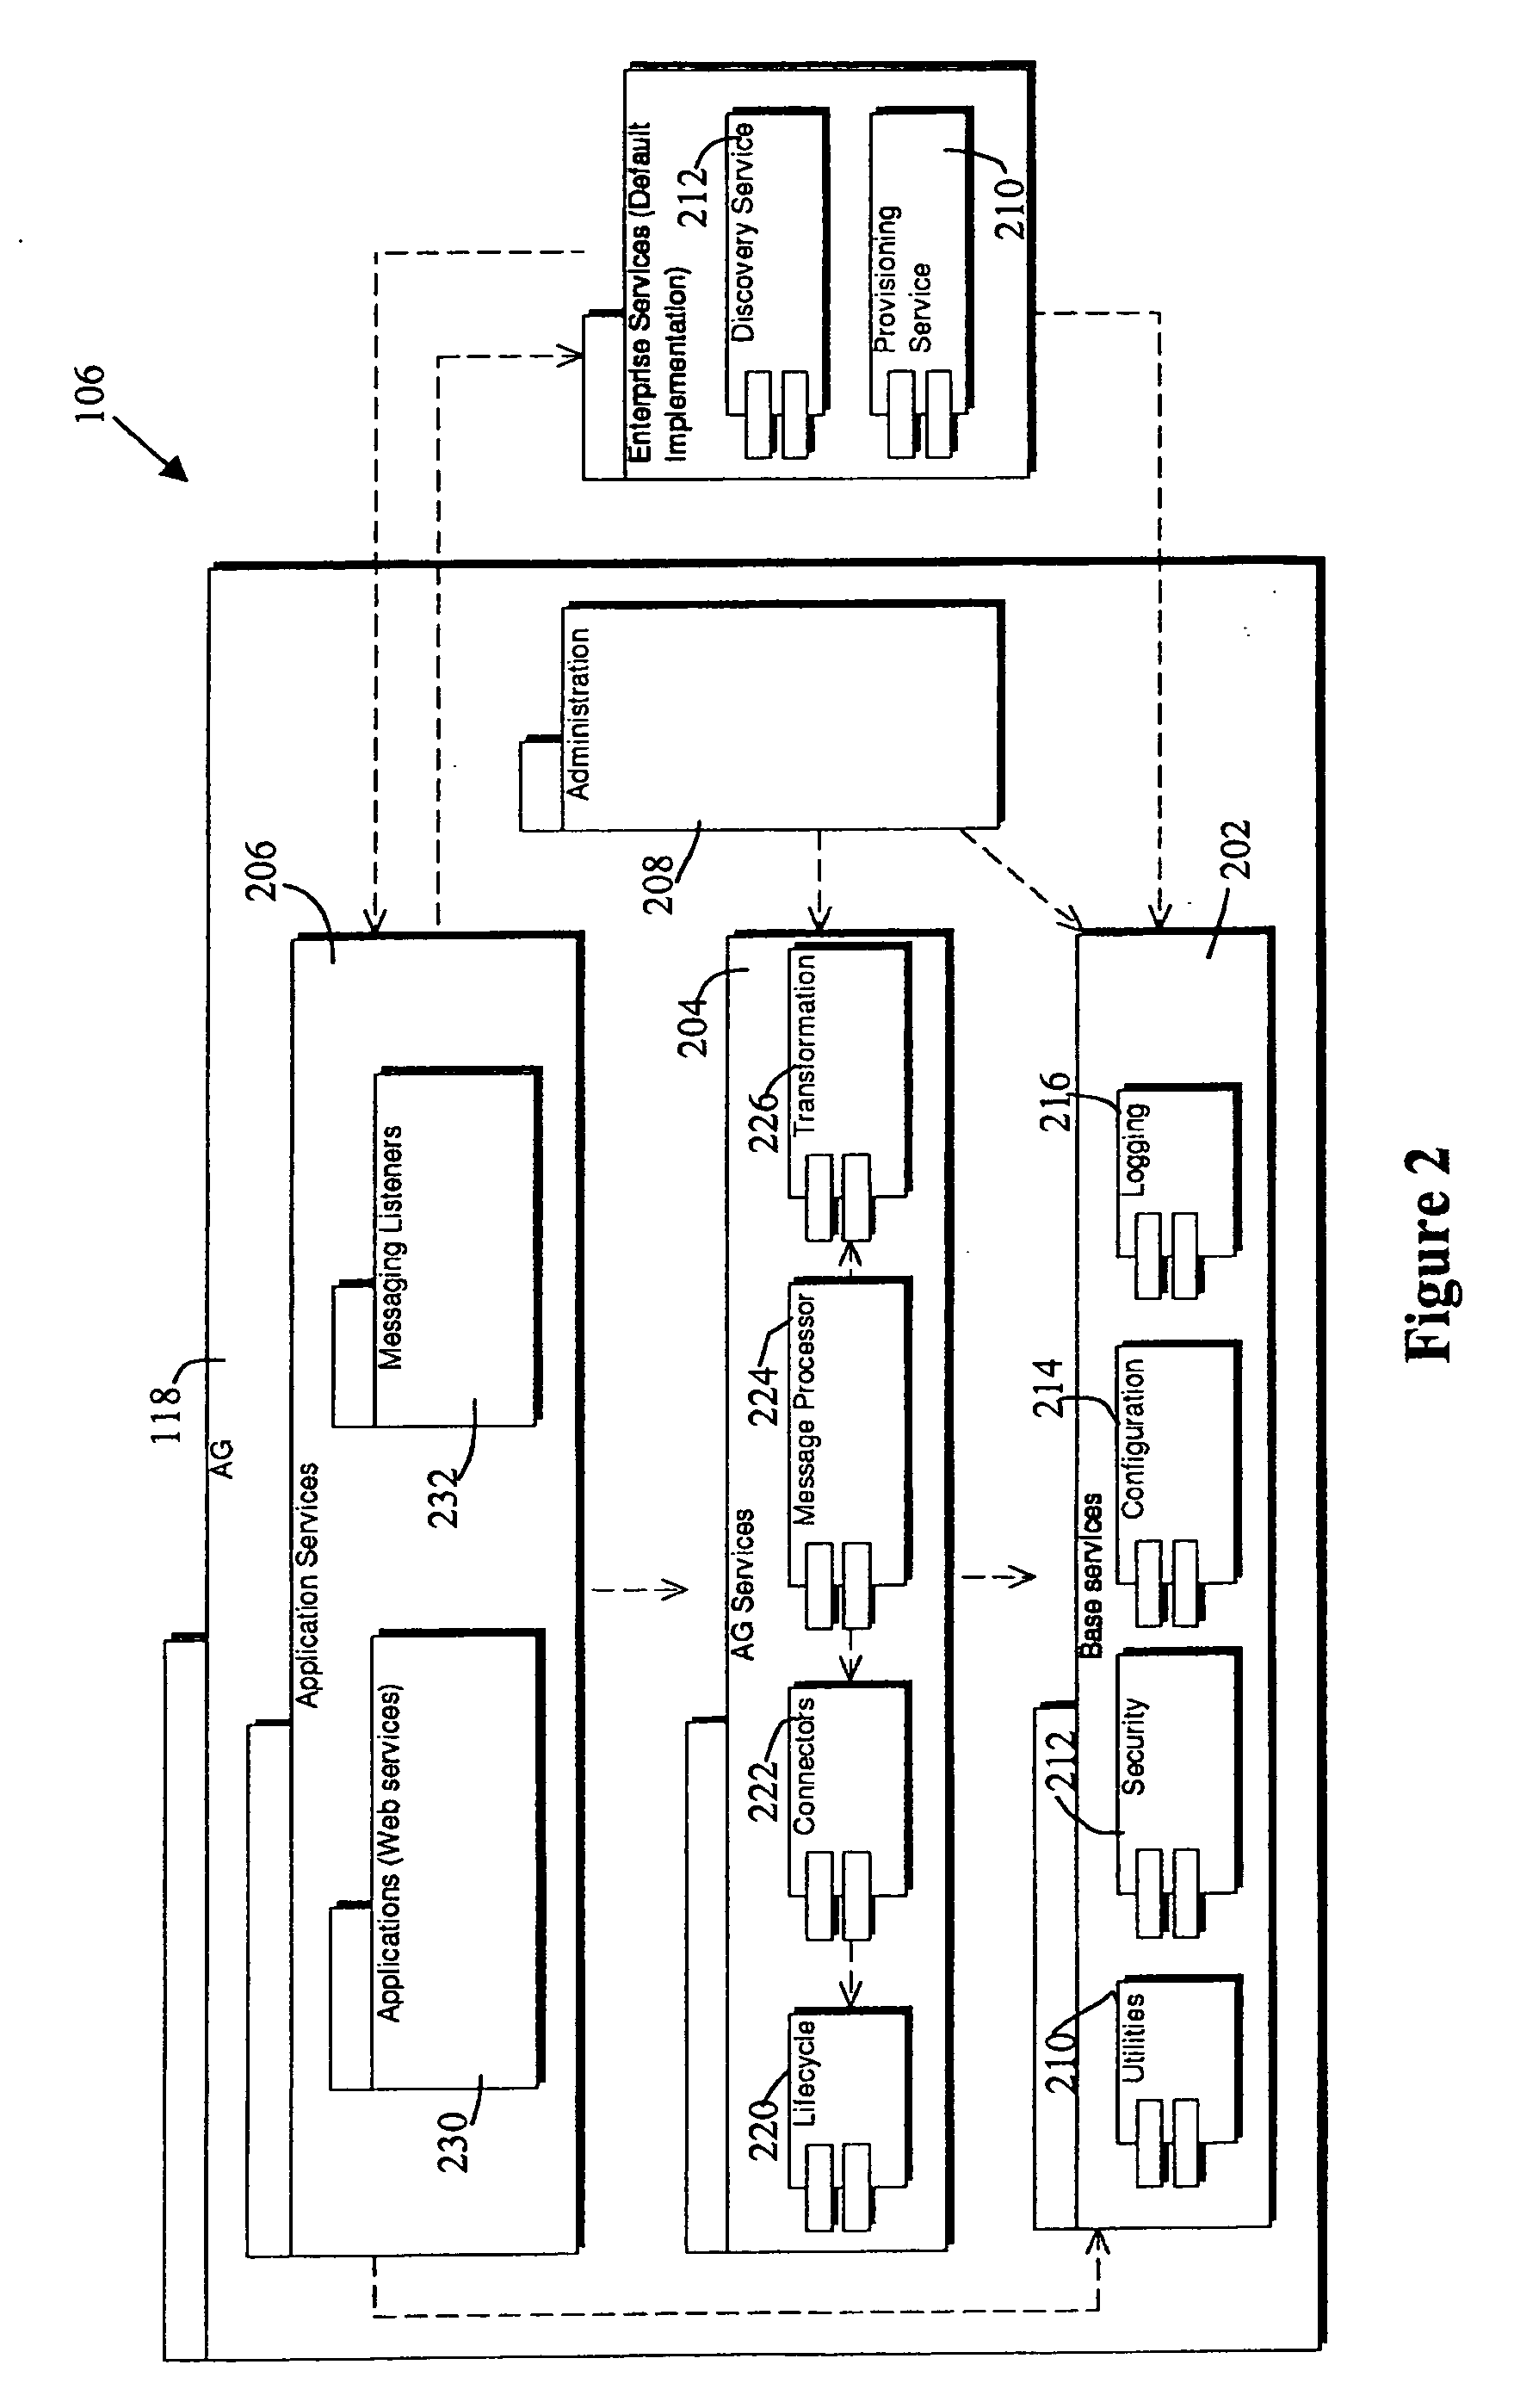 System and method for enabling asynchronous push-based applications on a wireless device